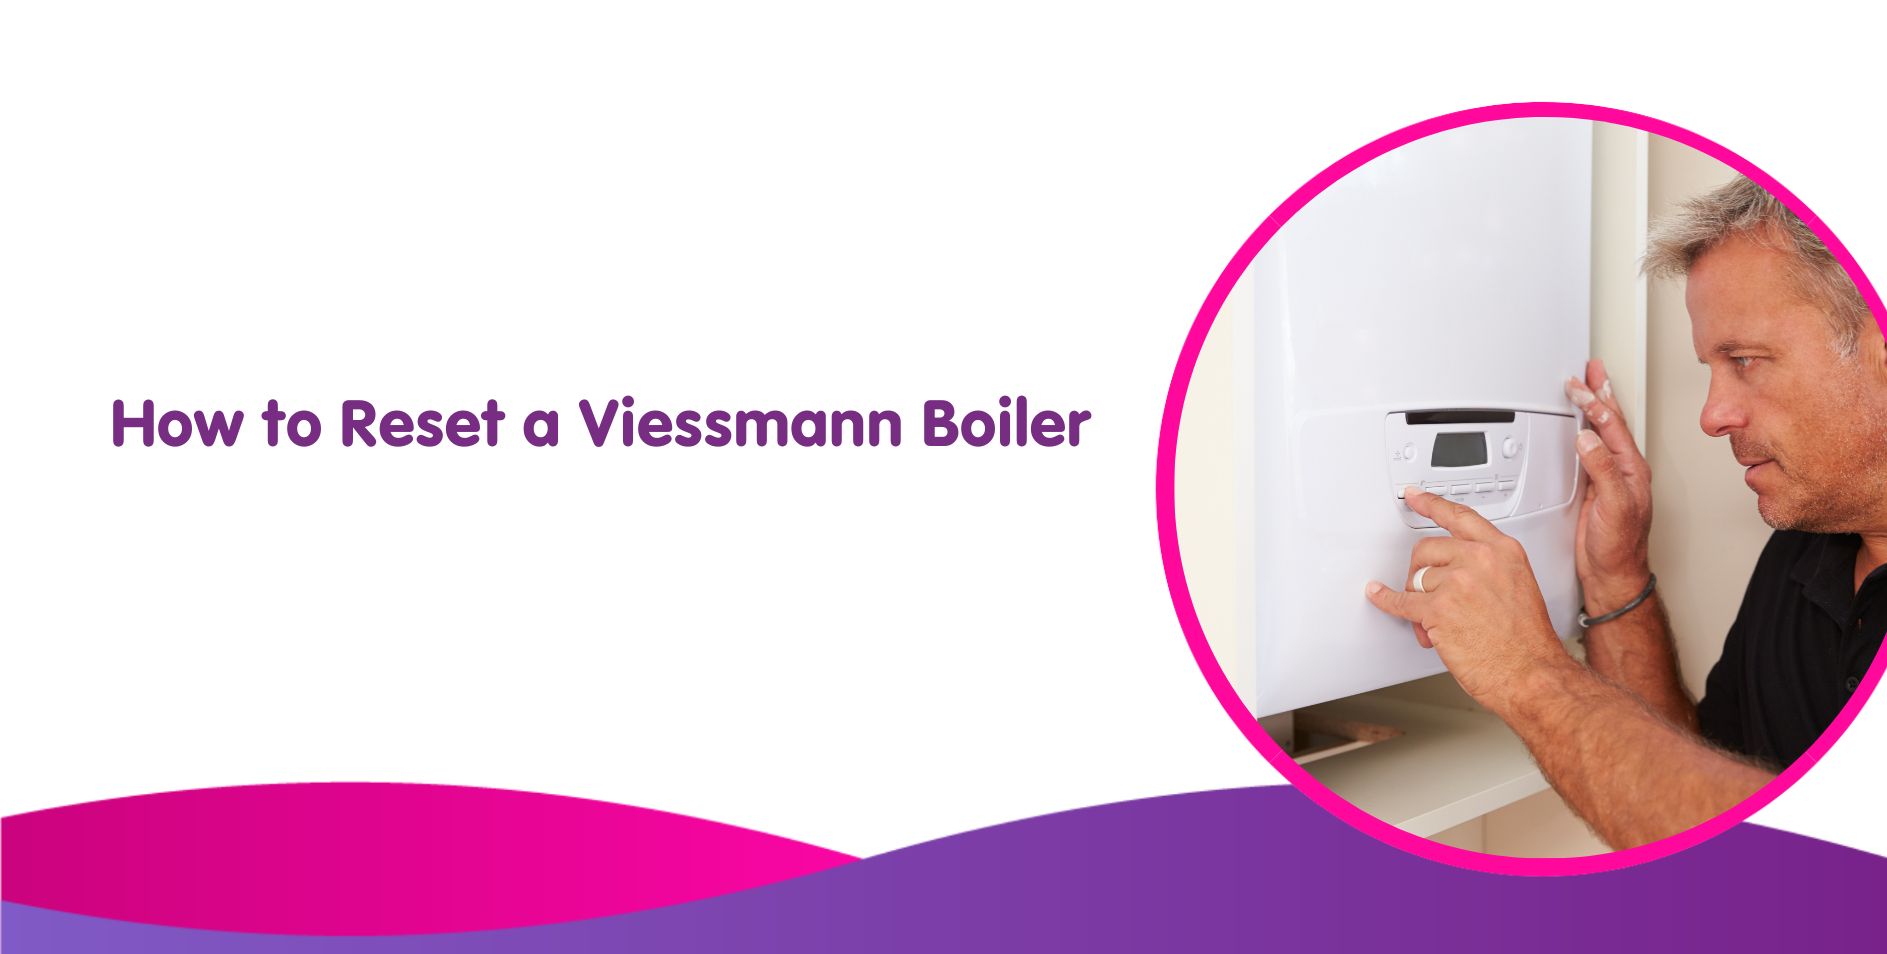 How to Reset a Viessmann Boiler Step-by-Step Guide